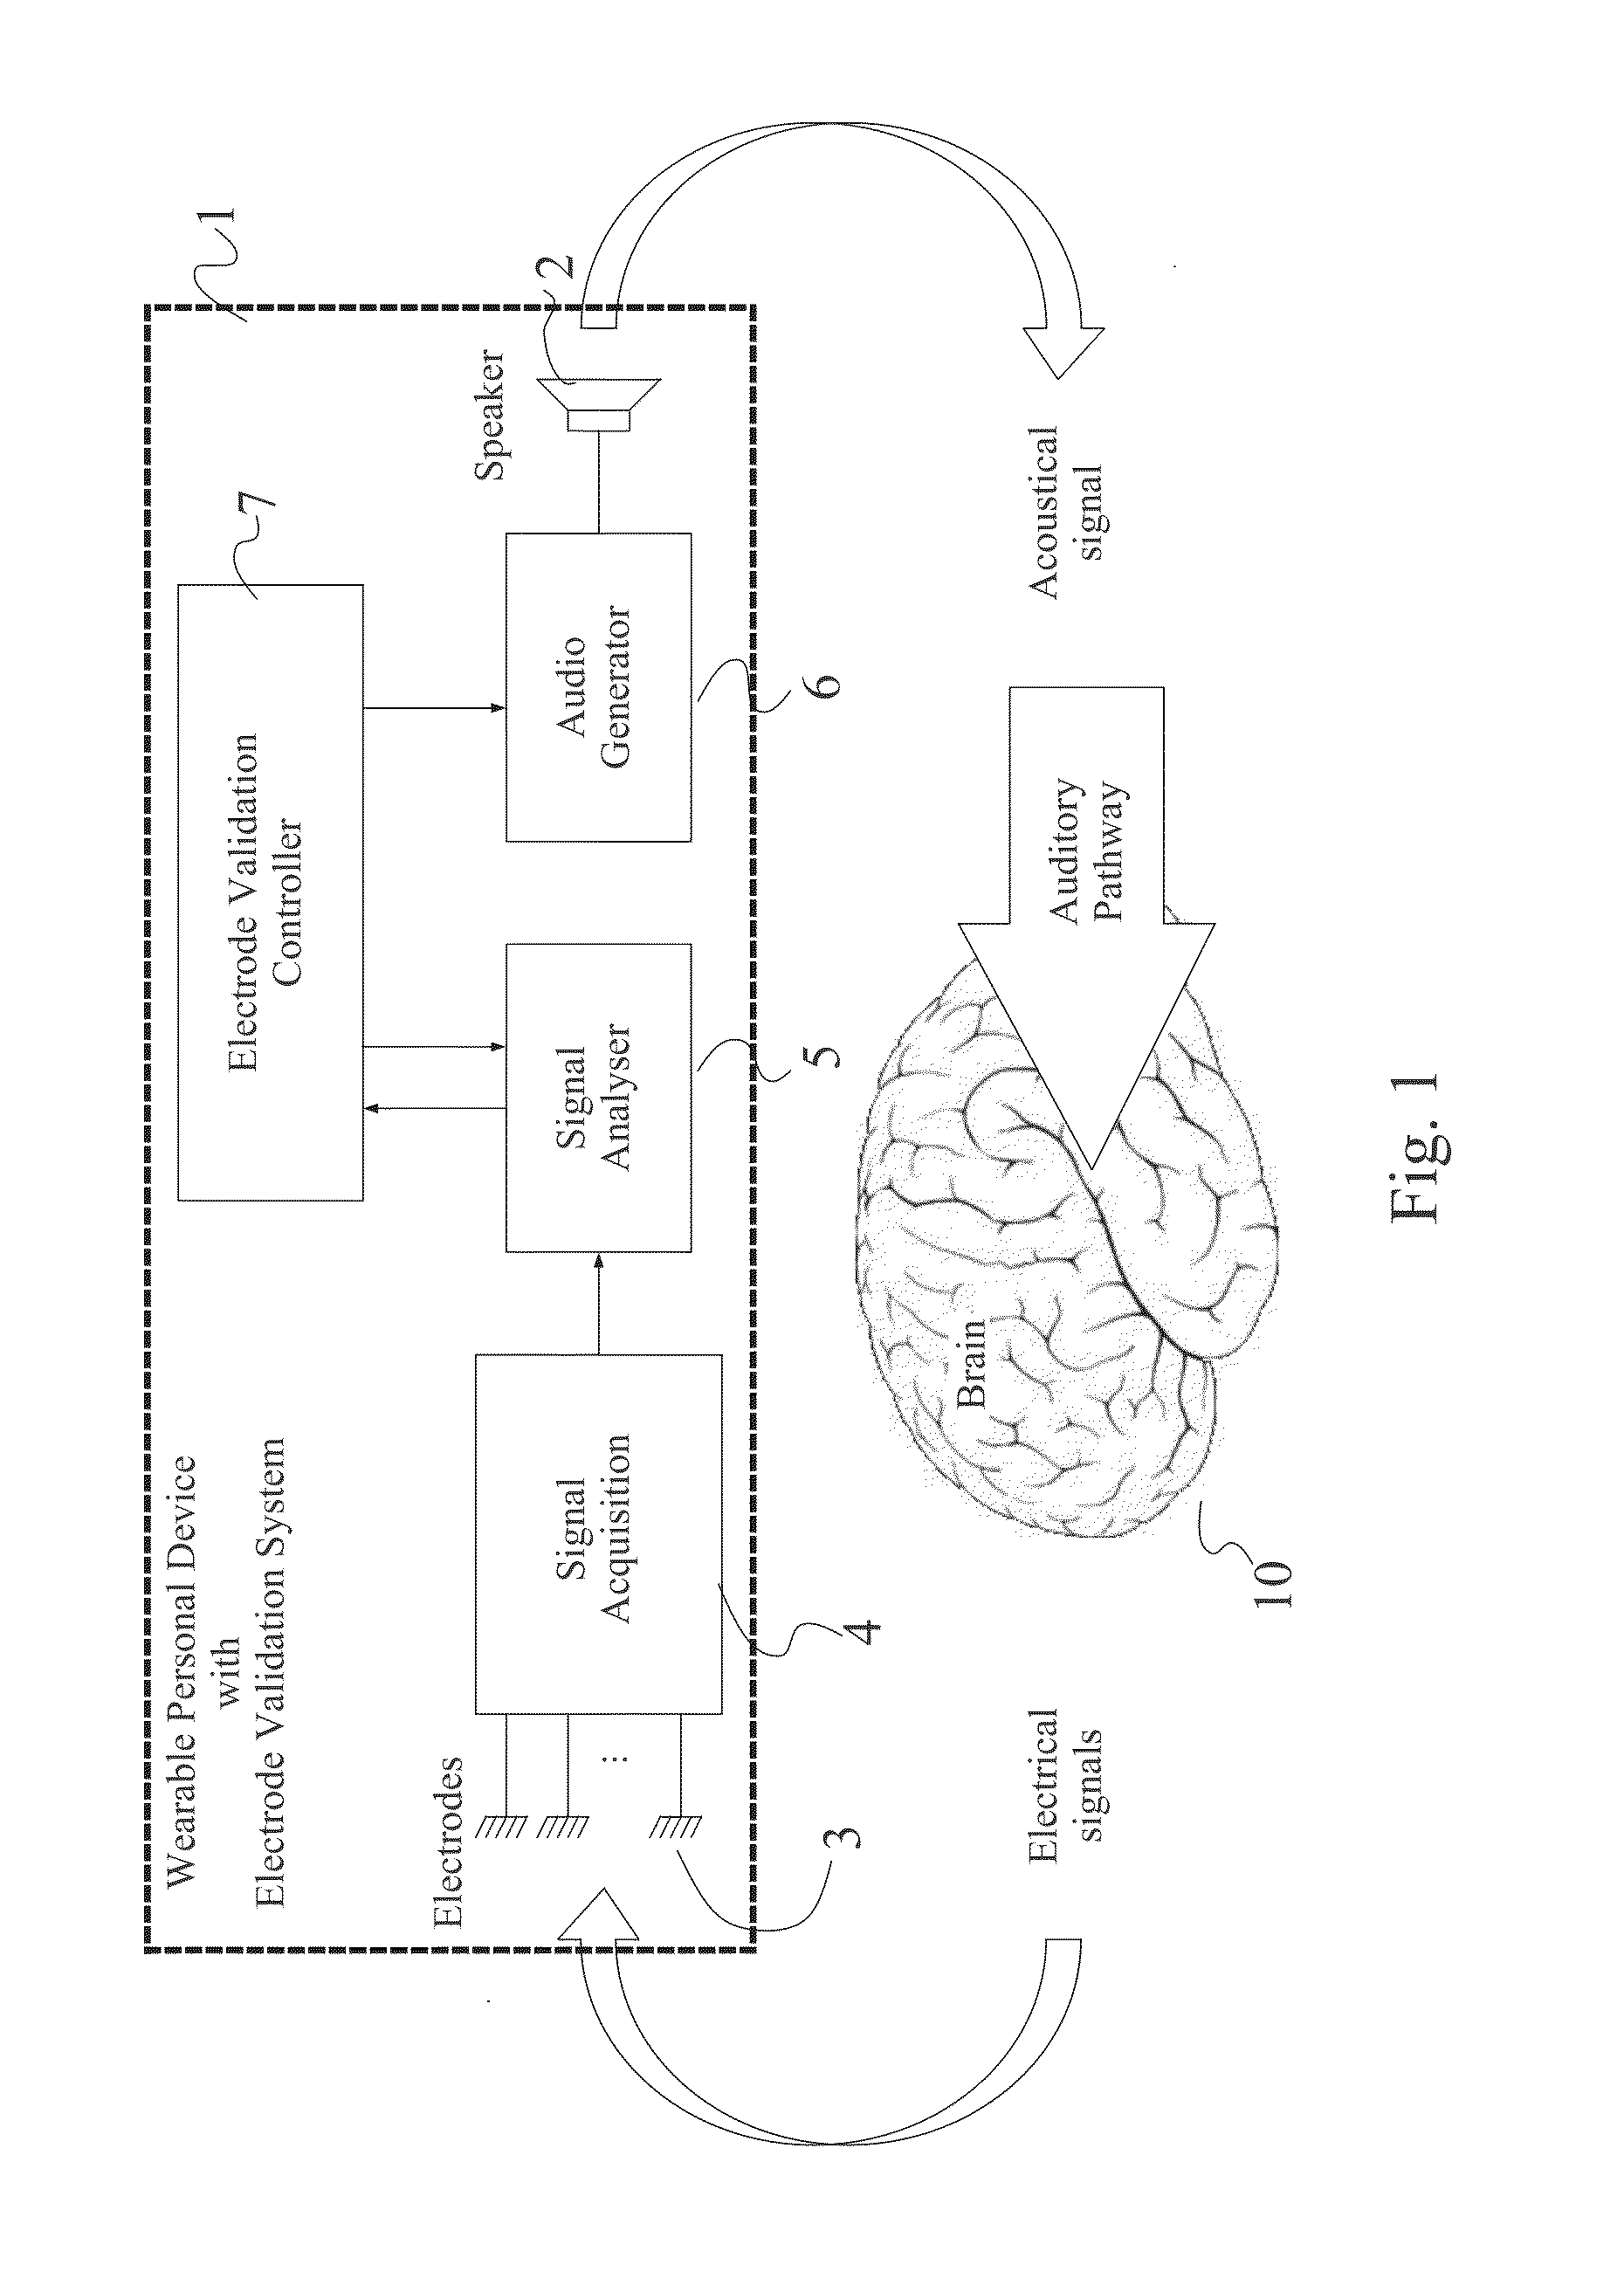 Personal eeg monitoring device with electrode validation